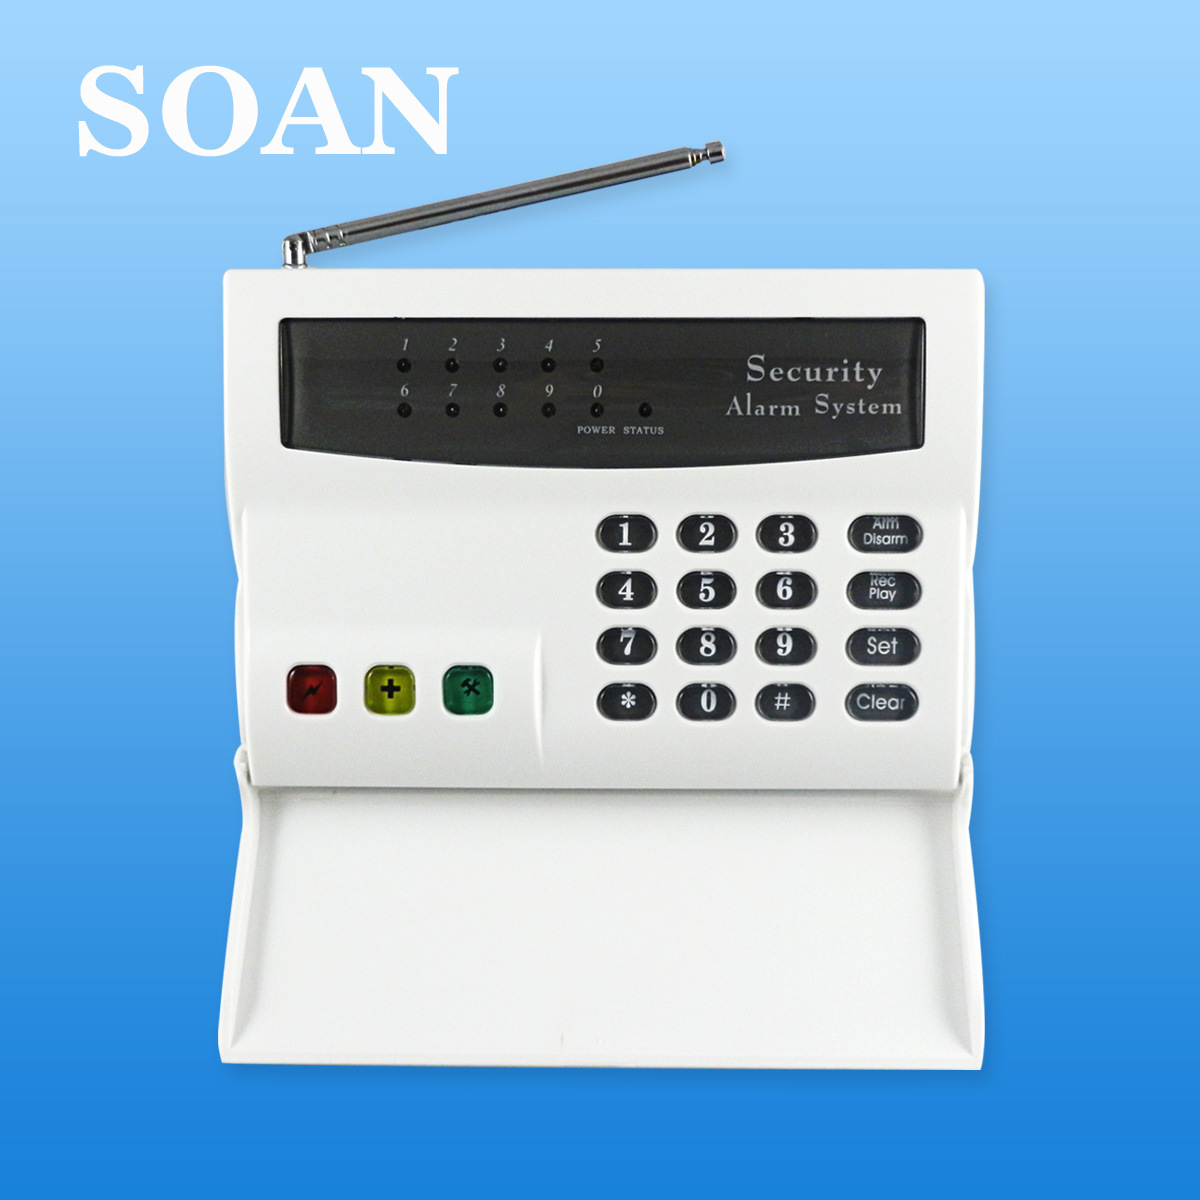 Auto Dial Home Security Alarm System (SN2800)